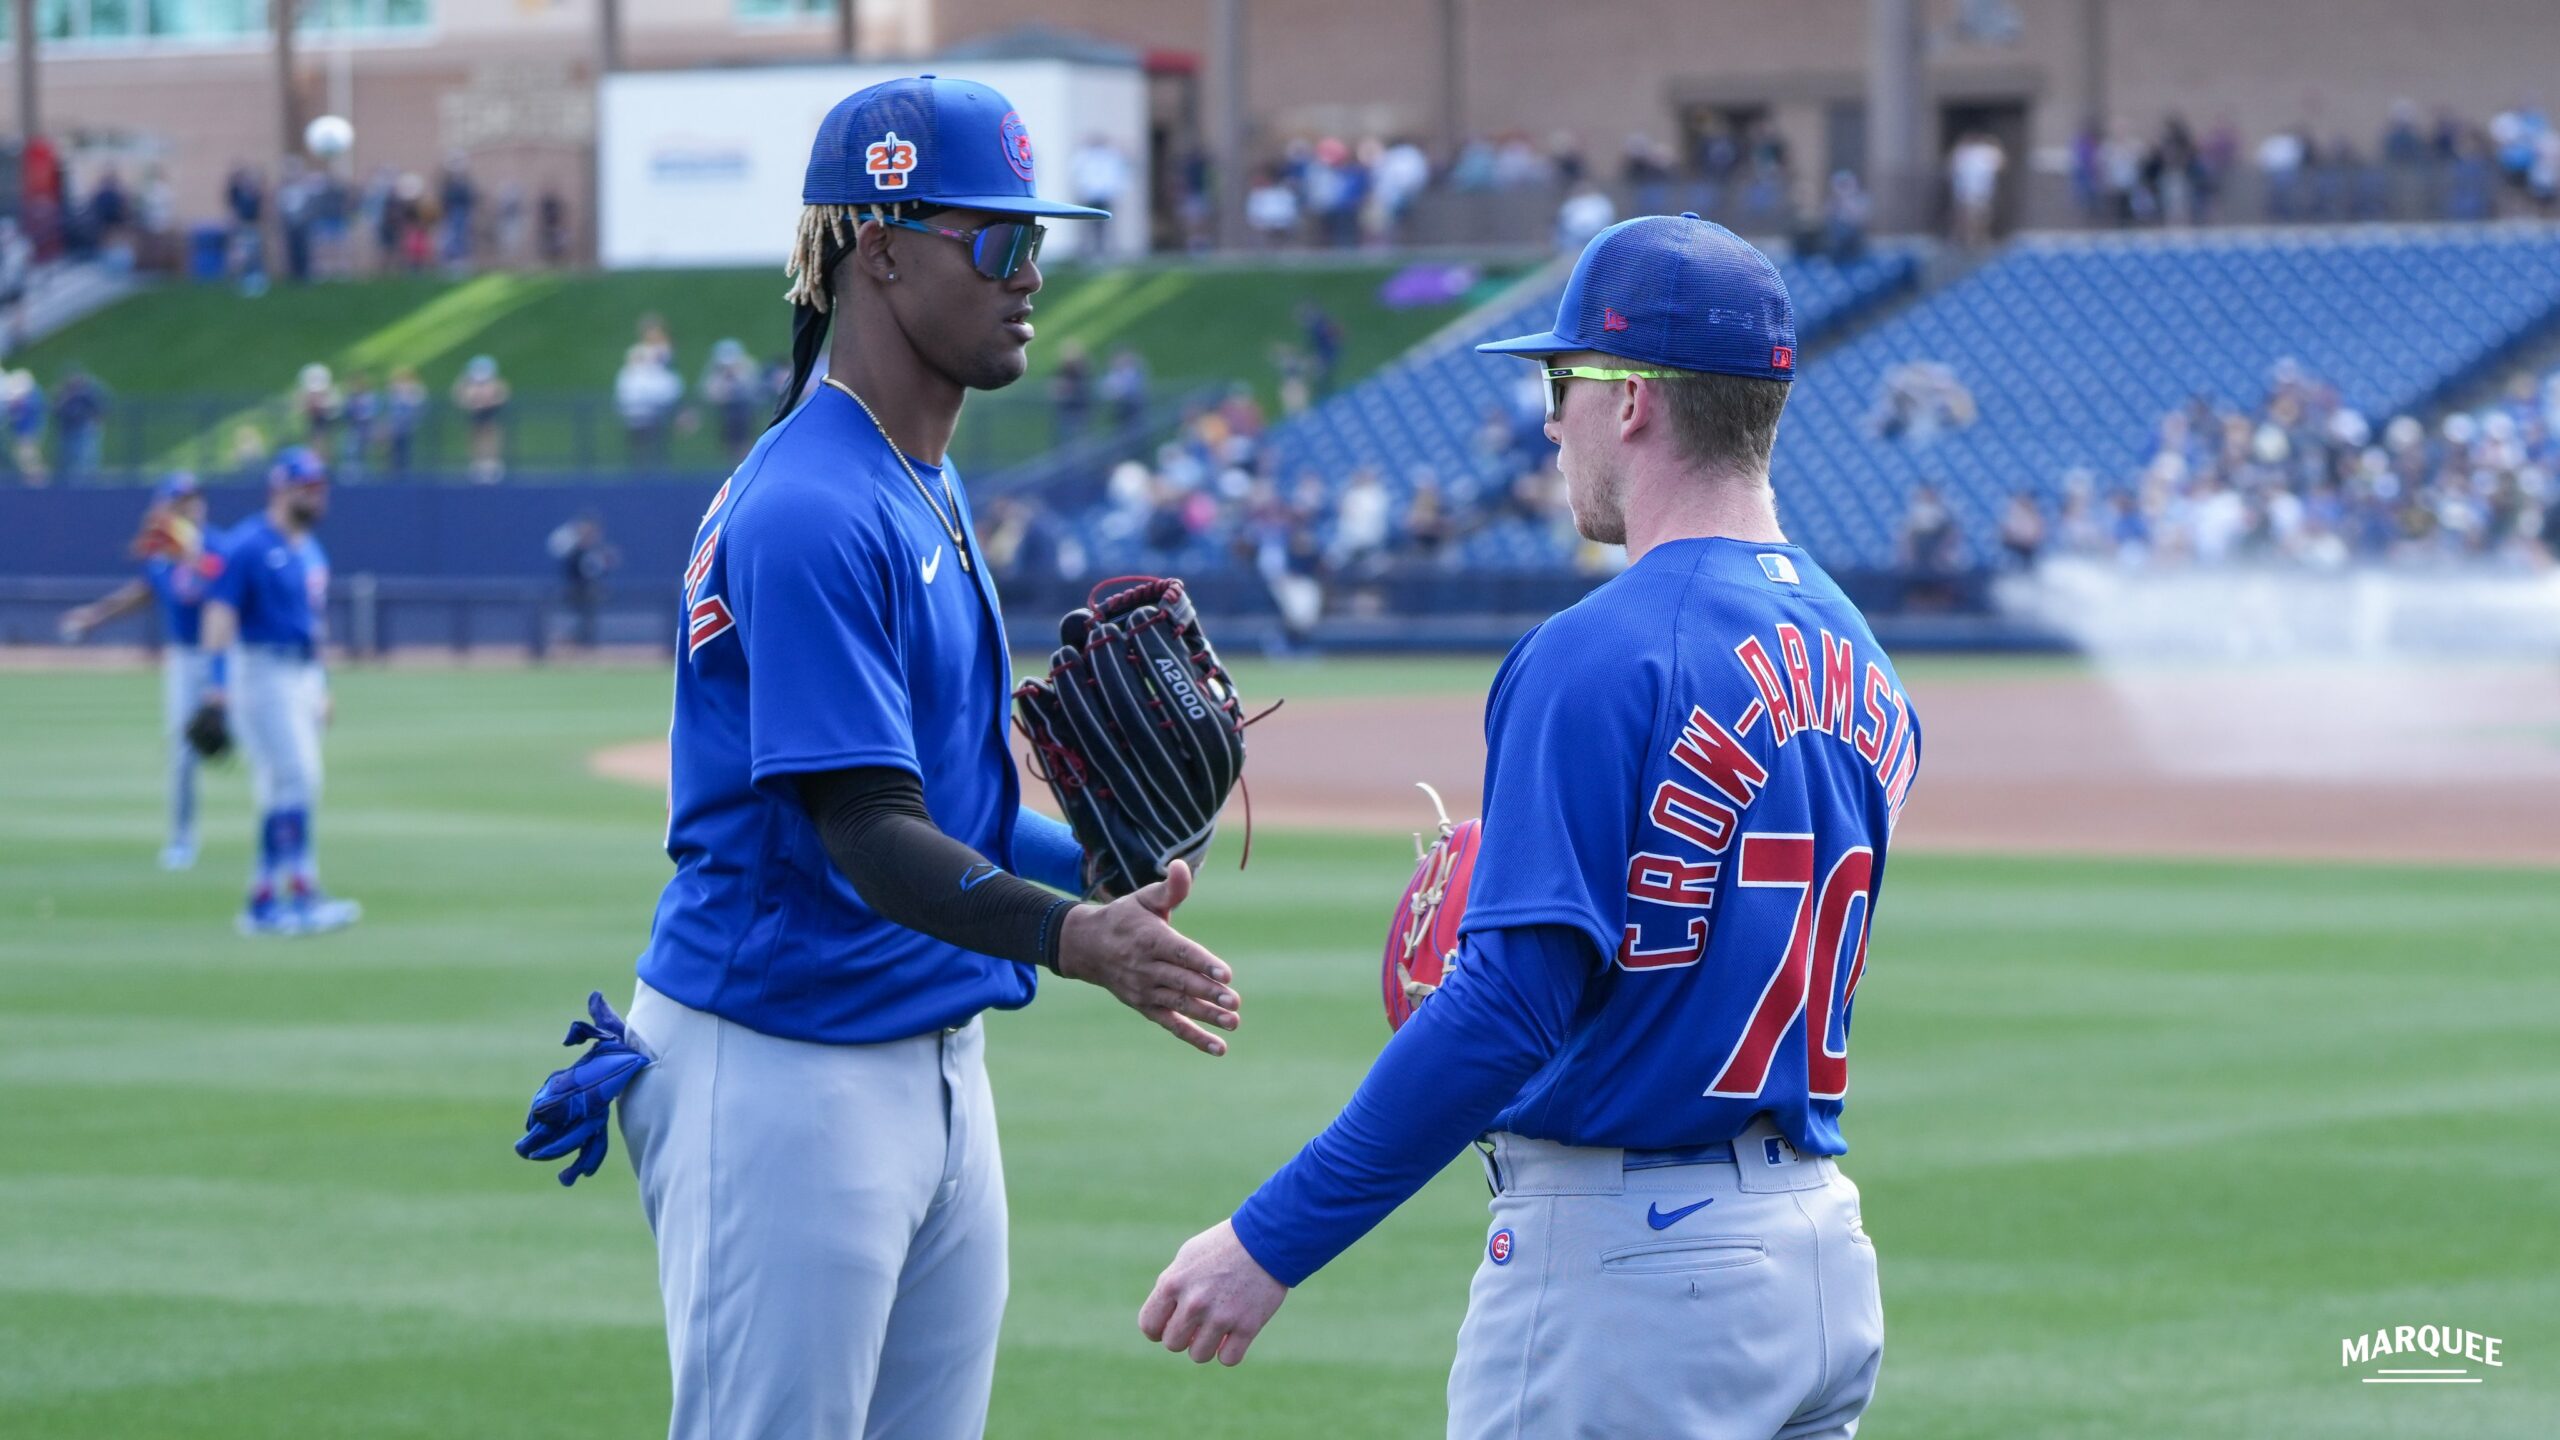 A winning connection: Why Nico Hoerner felt it was right time to extend  with the Cubs - Marquee Sports Network